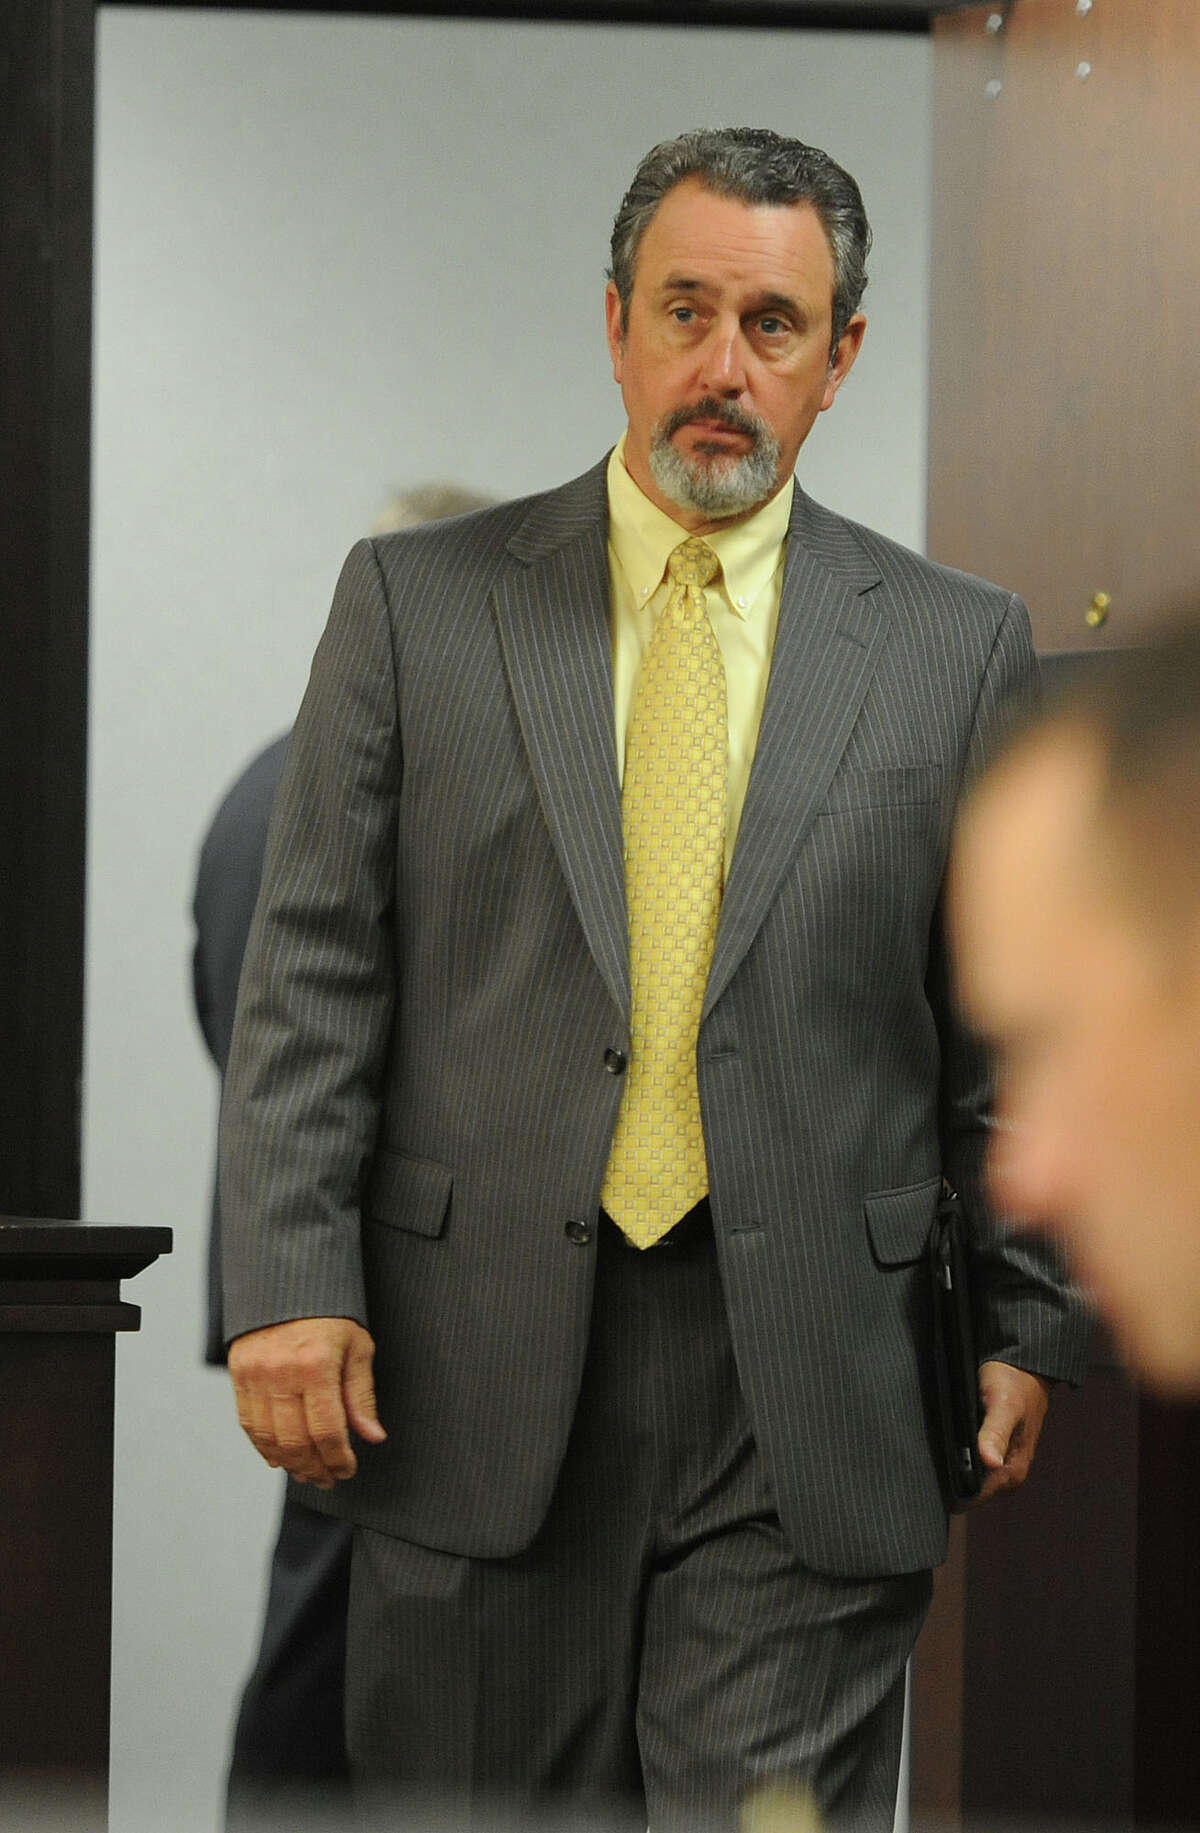 Jefferson County Sheriff Mitch Woods enters the courtroom just before the second day of trial begins in a Galveston County courtroom on Tuesday. Granger stands trial for the 2012 shooting of Minnie Ray Sebolt at the Jefferson County Courthouse. Photo taken Tuesday, April 23, 2013 Guiseppe Barranco/The Enterprise